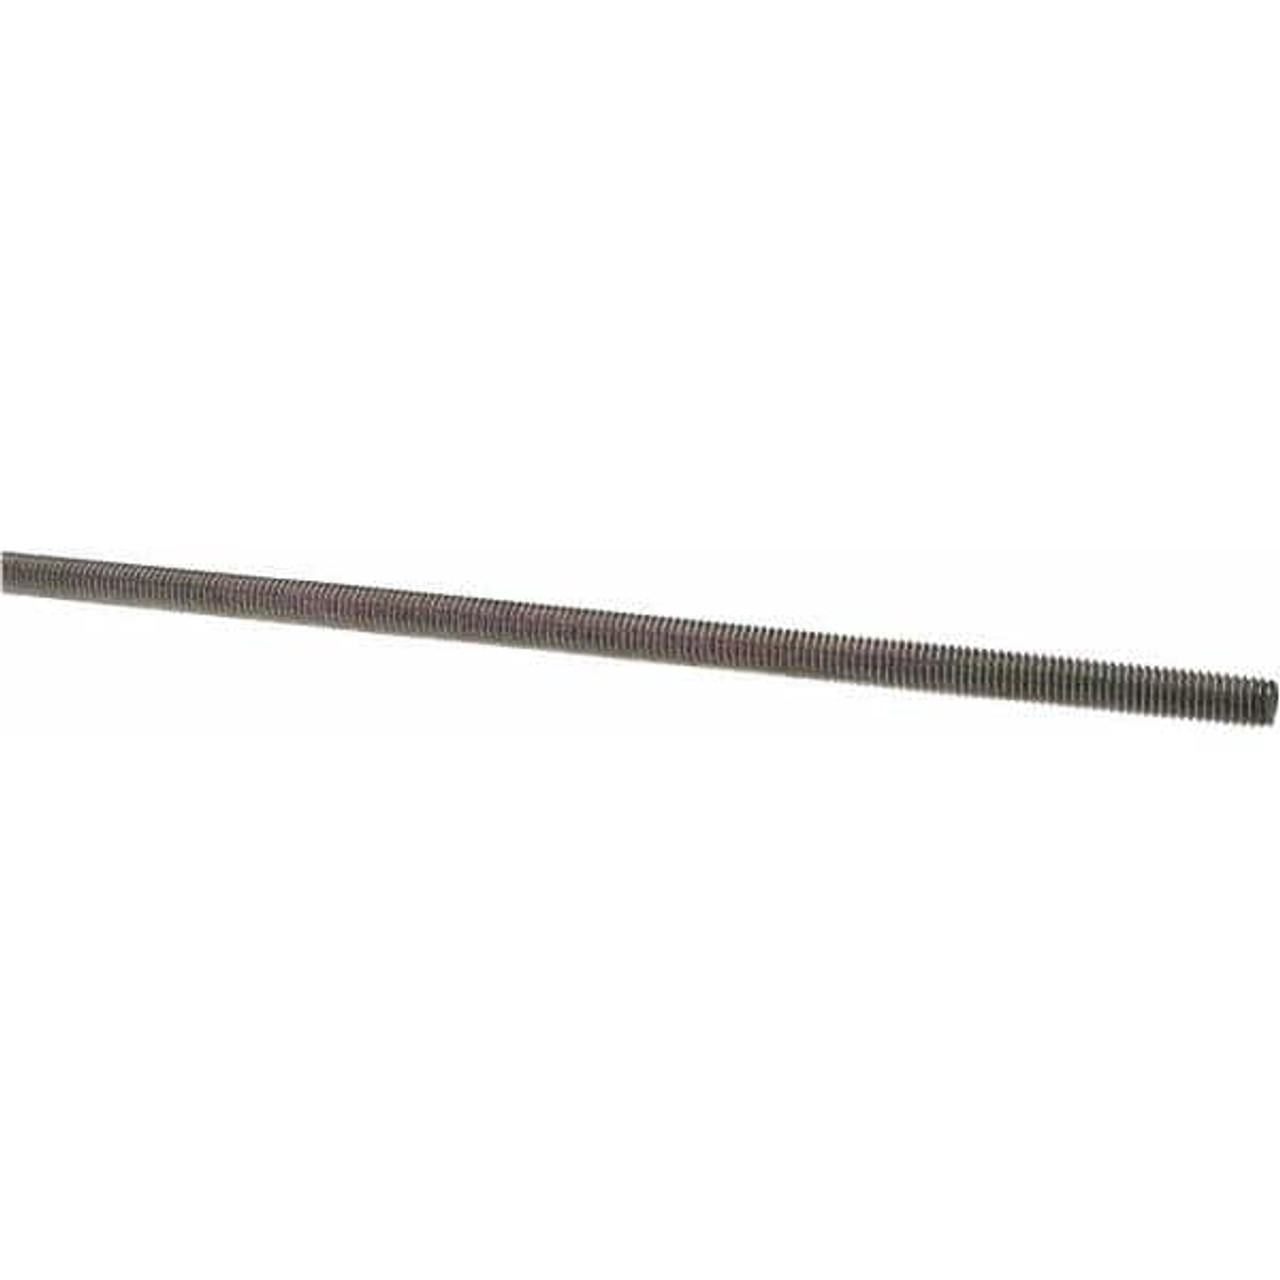 #10-32 x 6 Zinc Plated Low Carbon Steel Threaded Rod, Pack of 10 